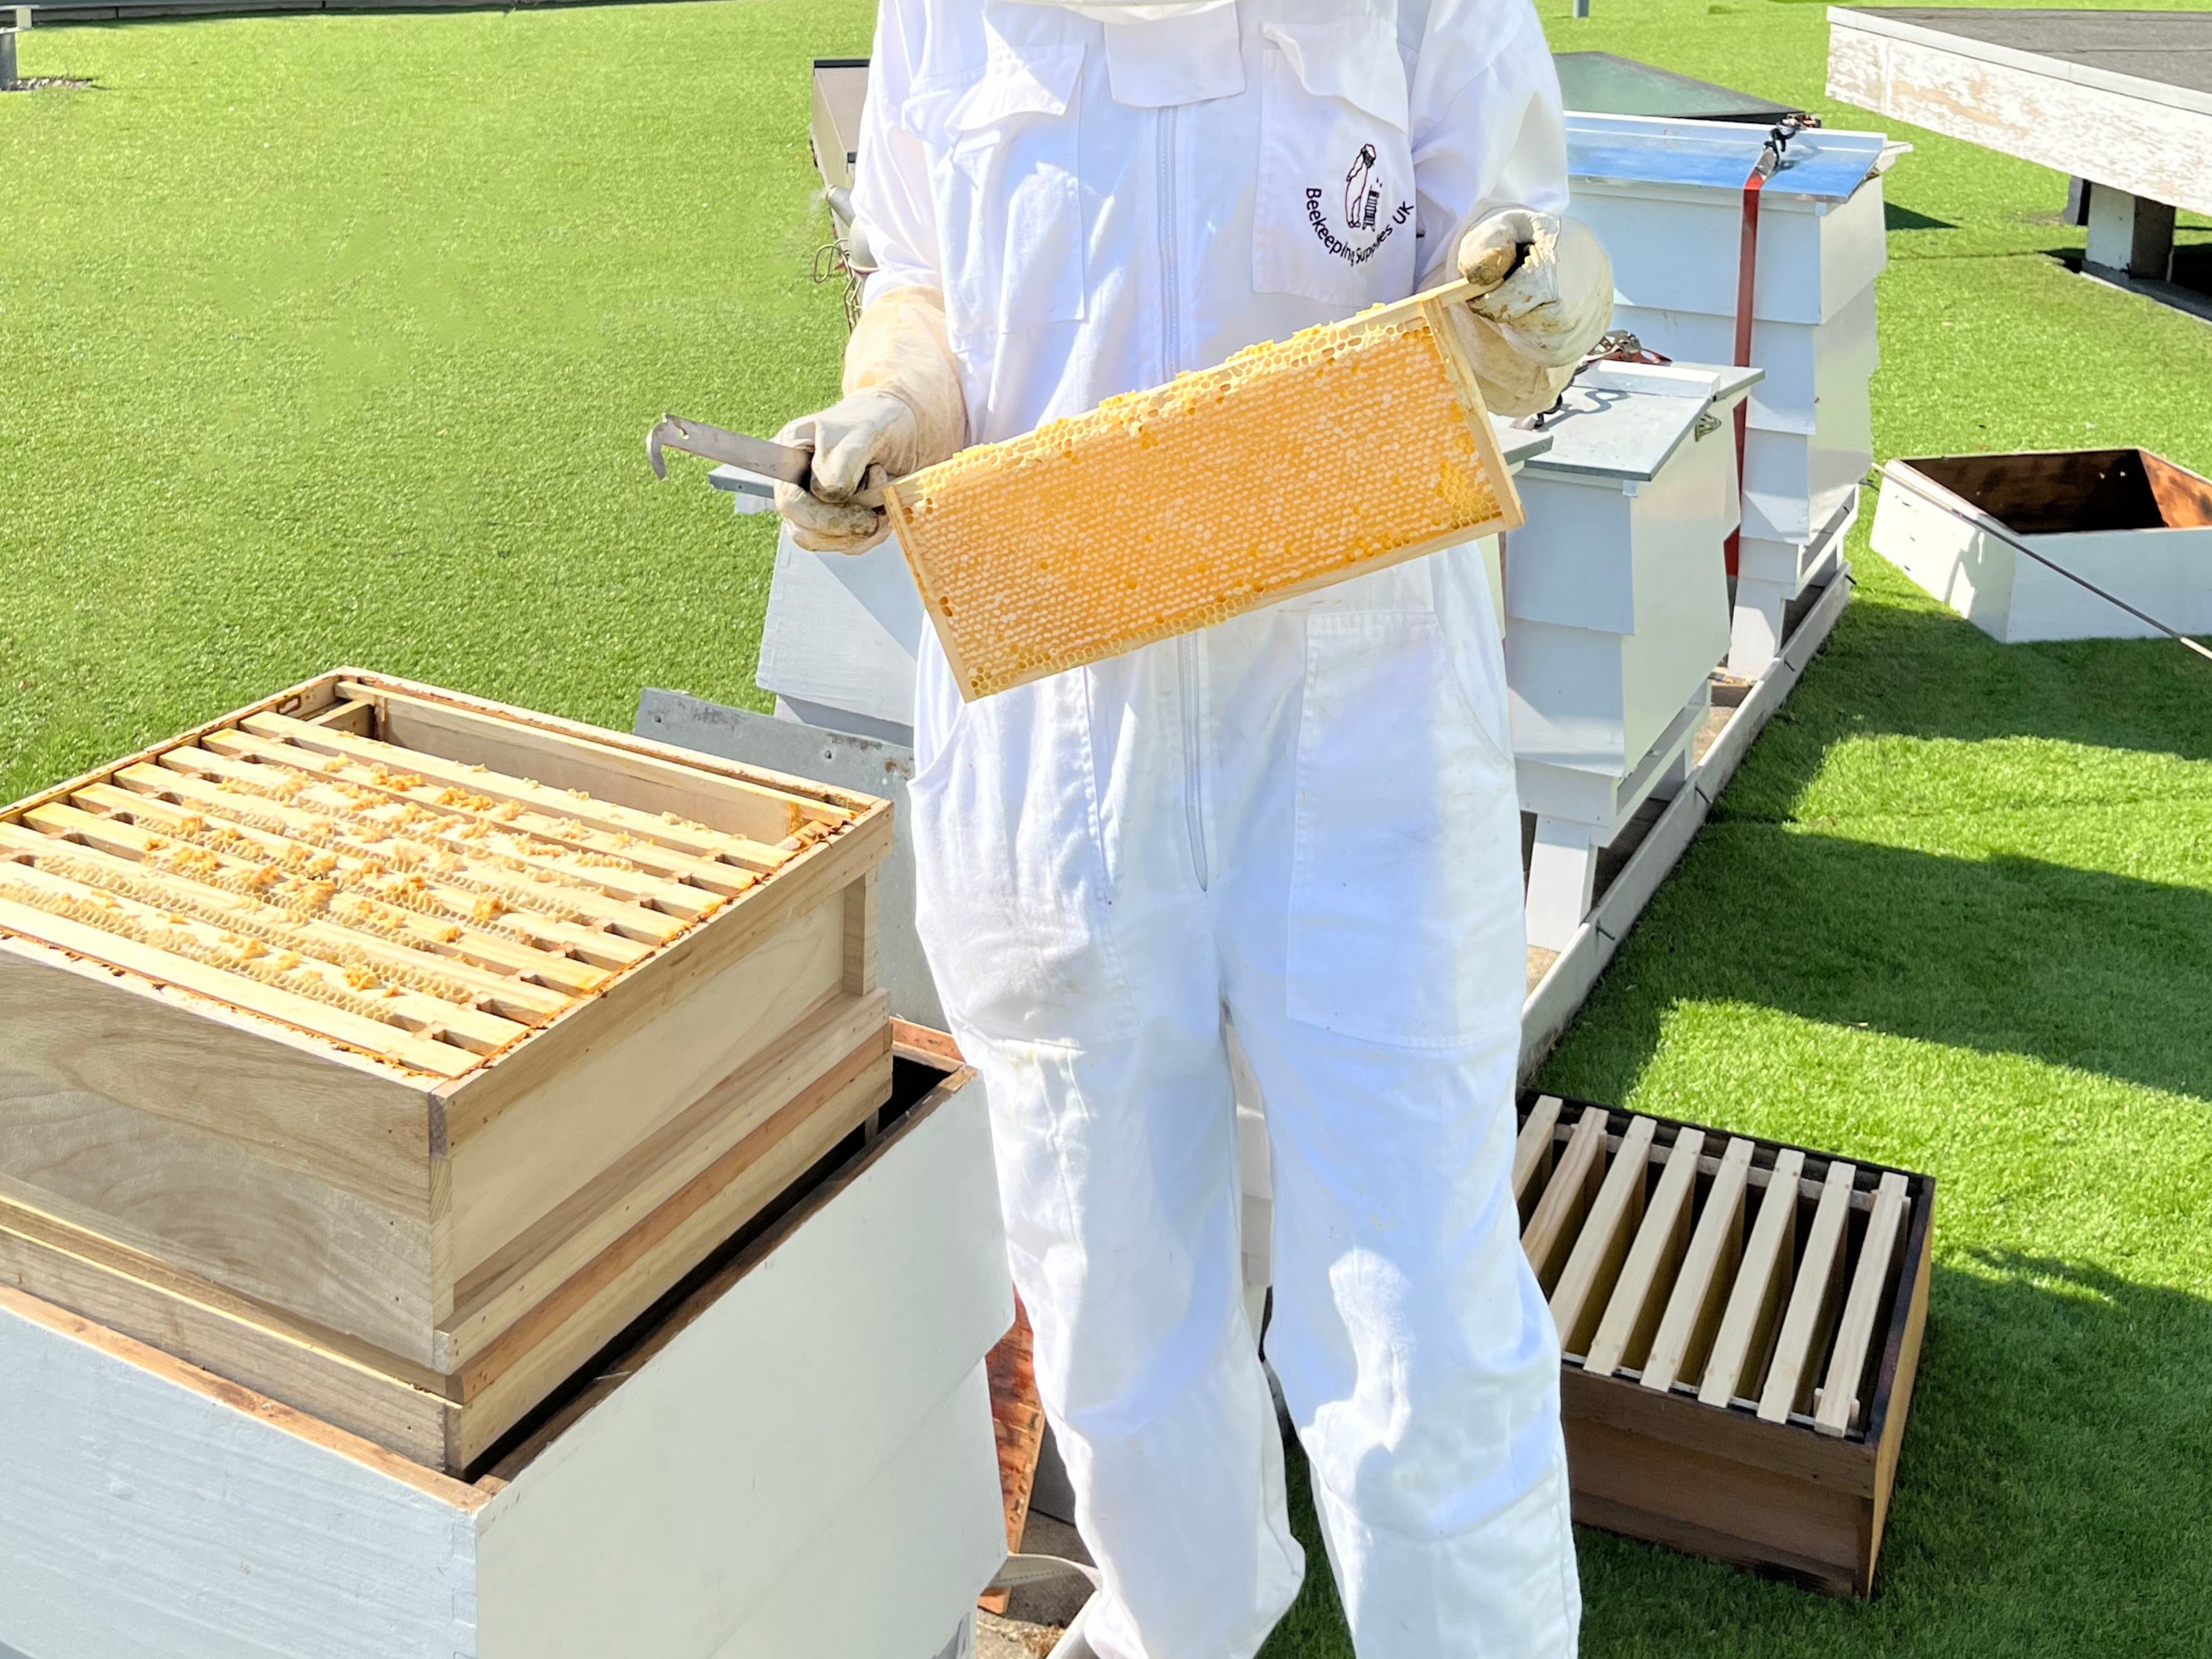 Sweet rewards: Harvesting the honey from the beehives at Royal Lancaster London